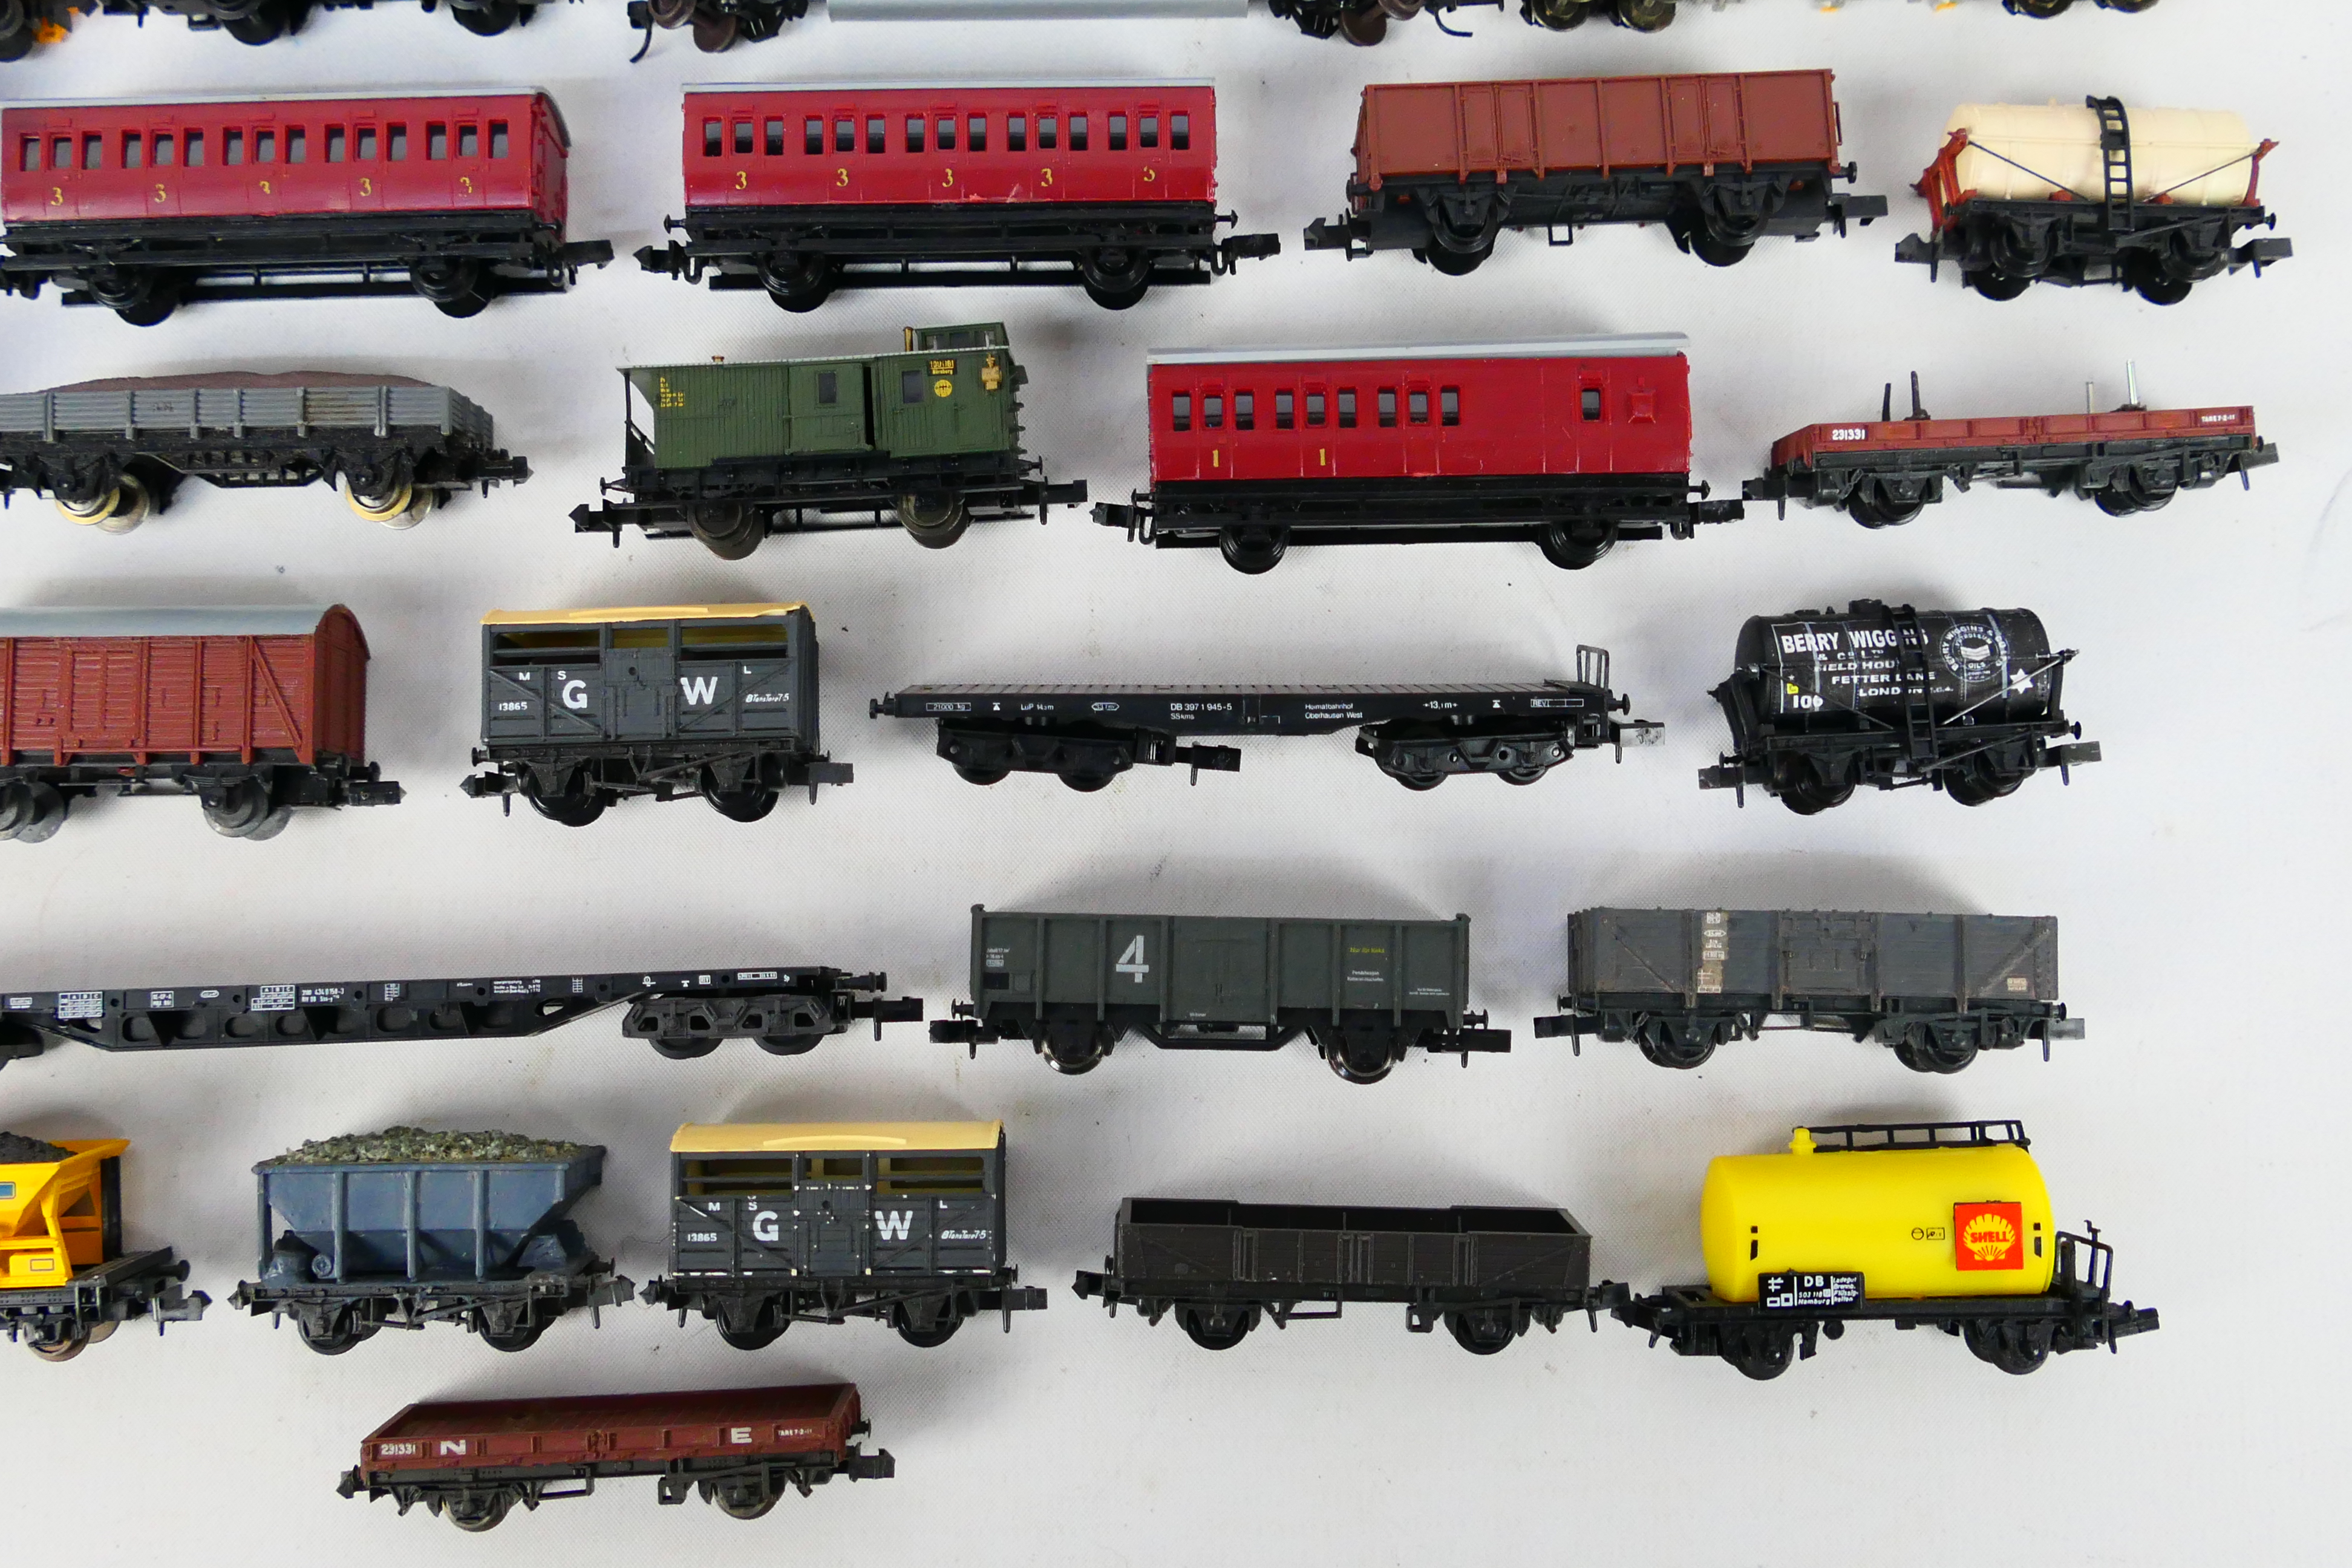 Peco - Athearn - Minitrix Bertran - Other - Over 30 unboxed items of mainly N gauge items of - Image 5 of 5